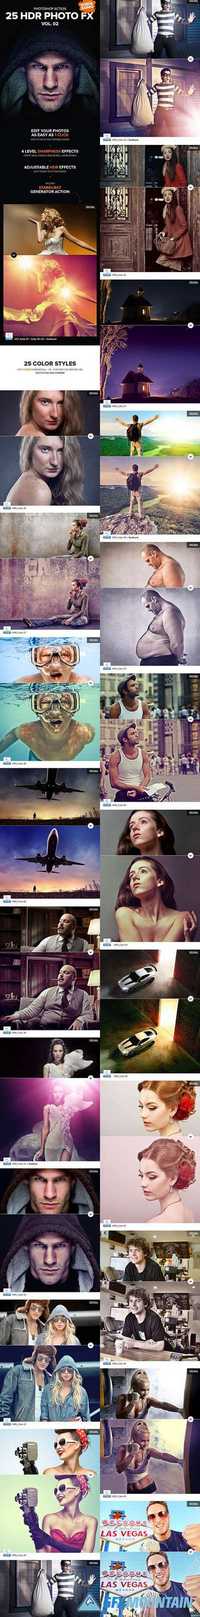 Graphicriver 25 HDR Photo FX V.2 - Photoshop Action 9953313